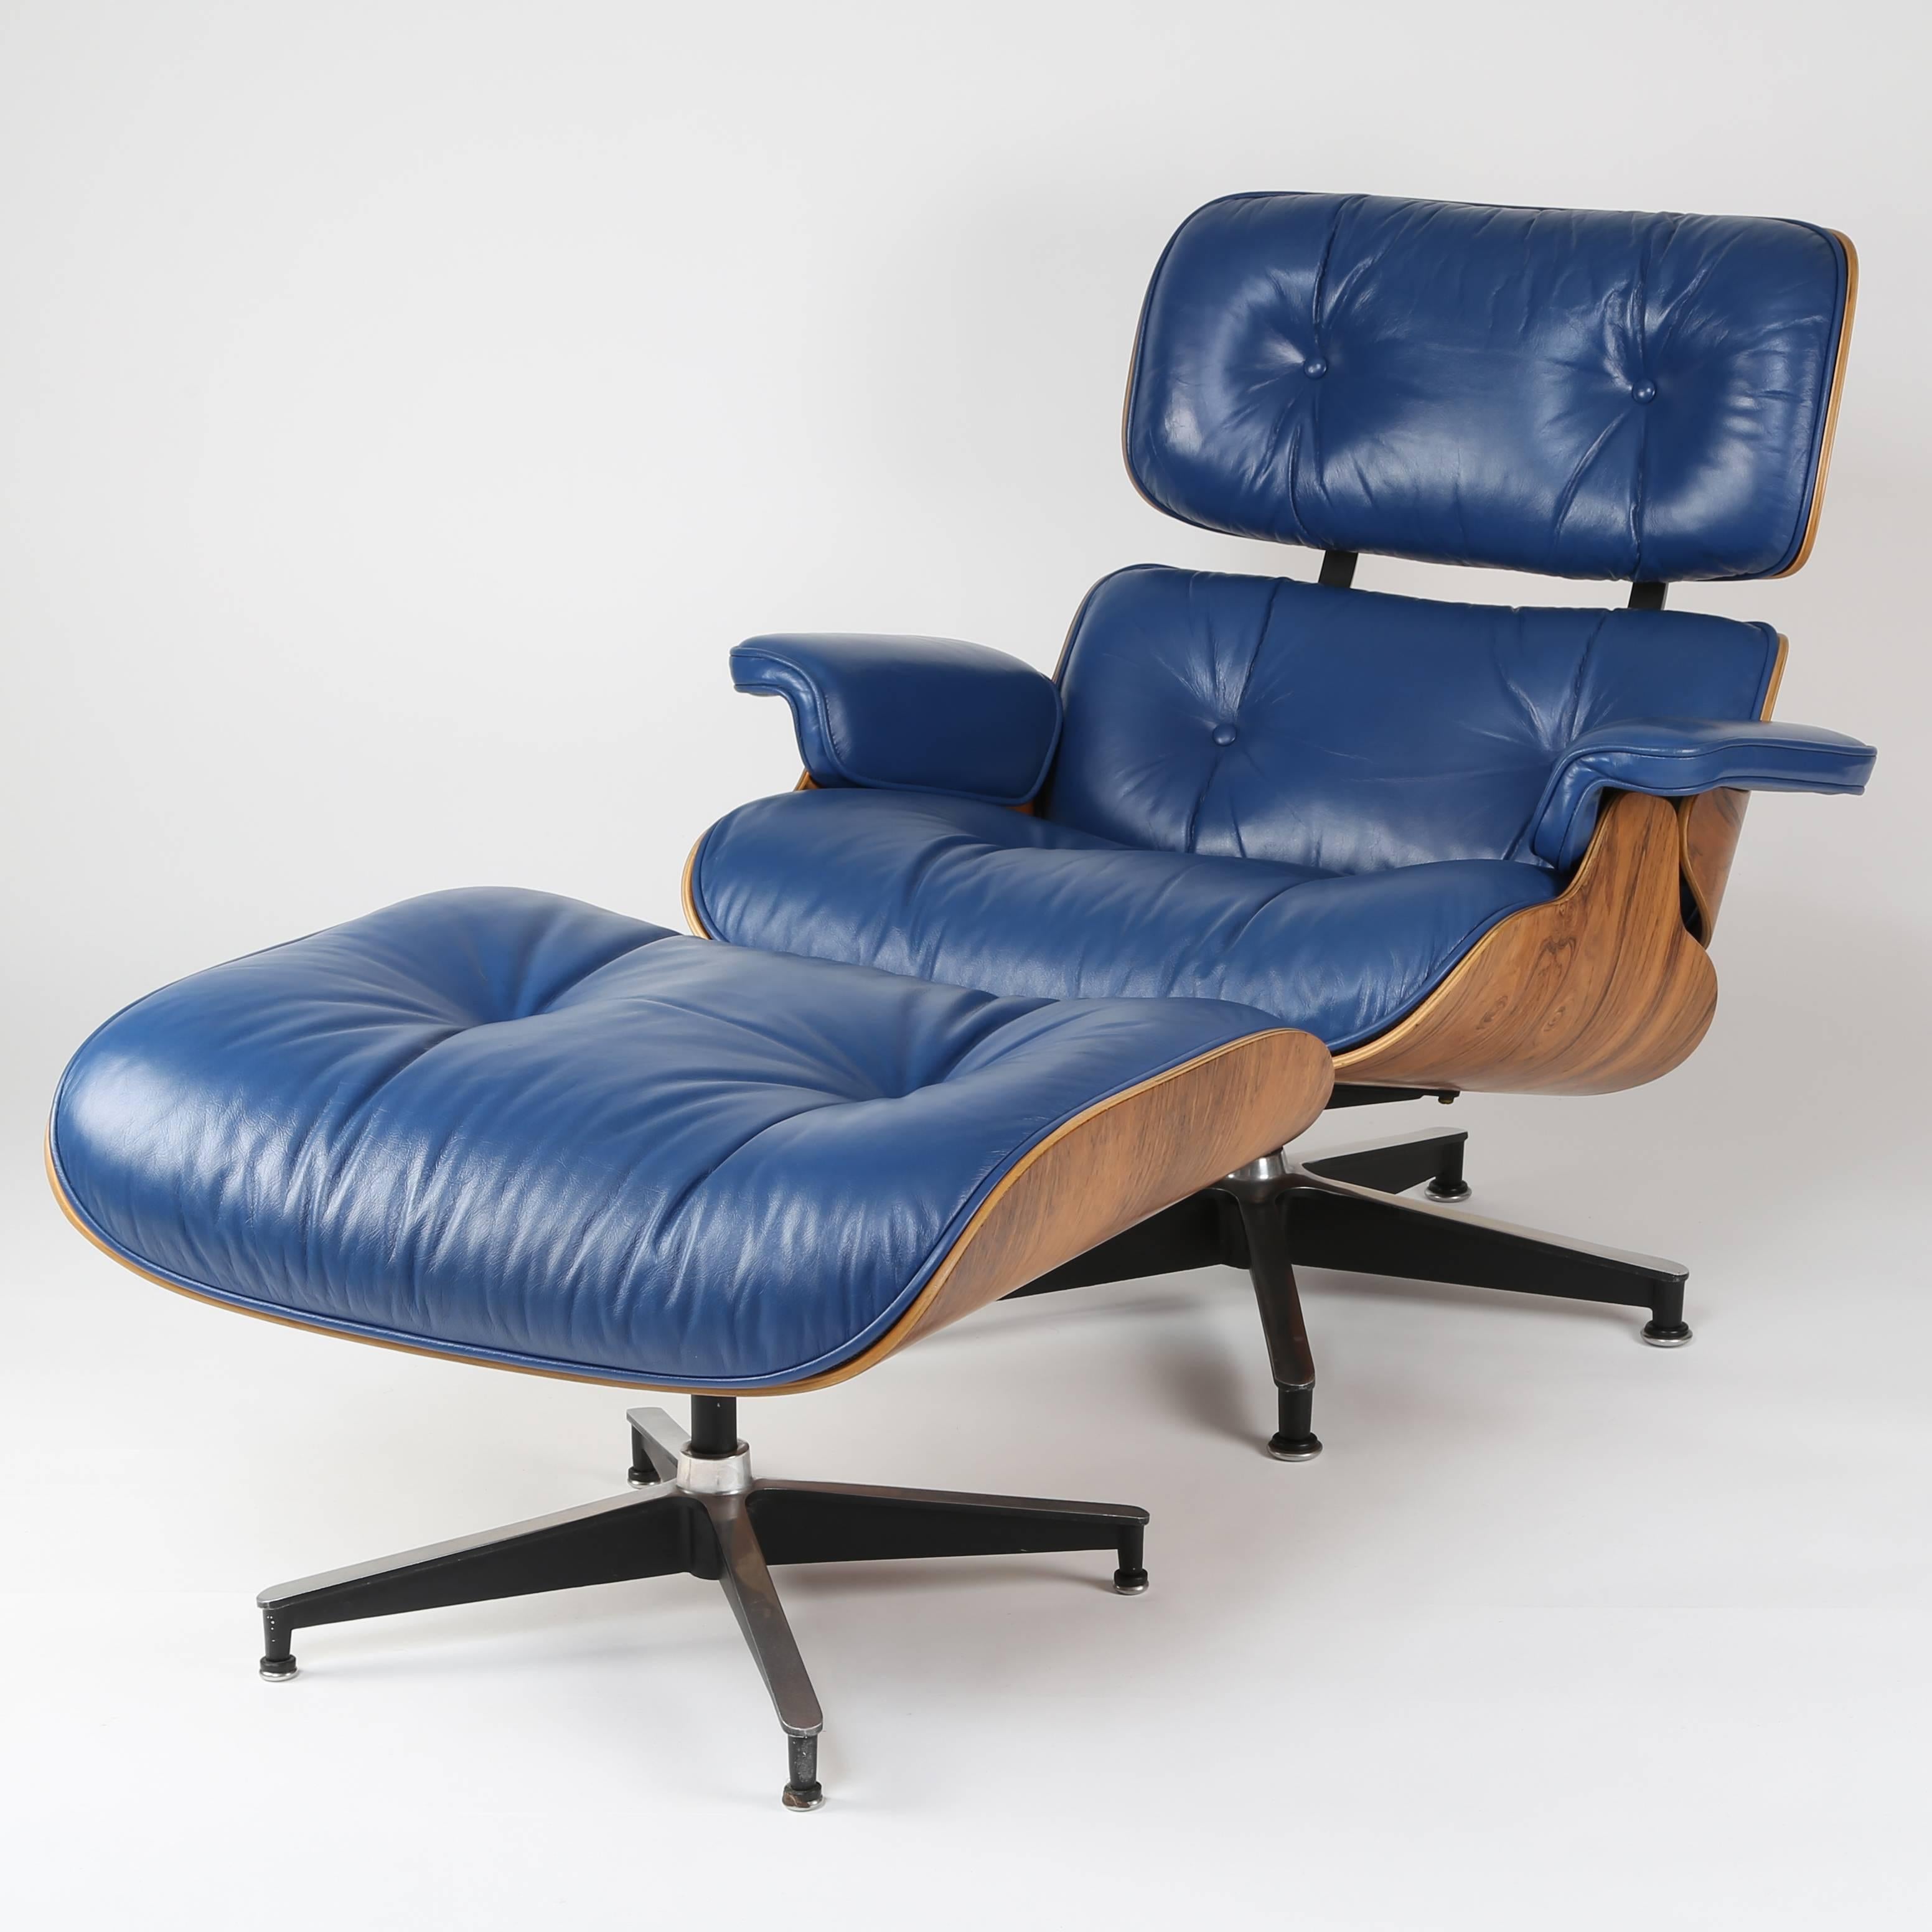 Rare royal-blue leather puts a unique twist on this iconic mid-century design. Restored and in excellent vintage condition, with smooth swivel mechanism. Purchased from the original owner, this set dates to the early 1970s. Original Herman Miller